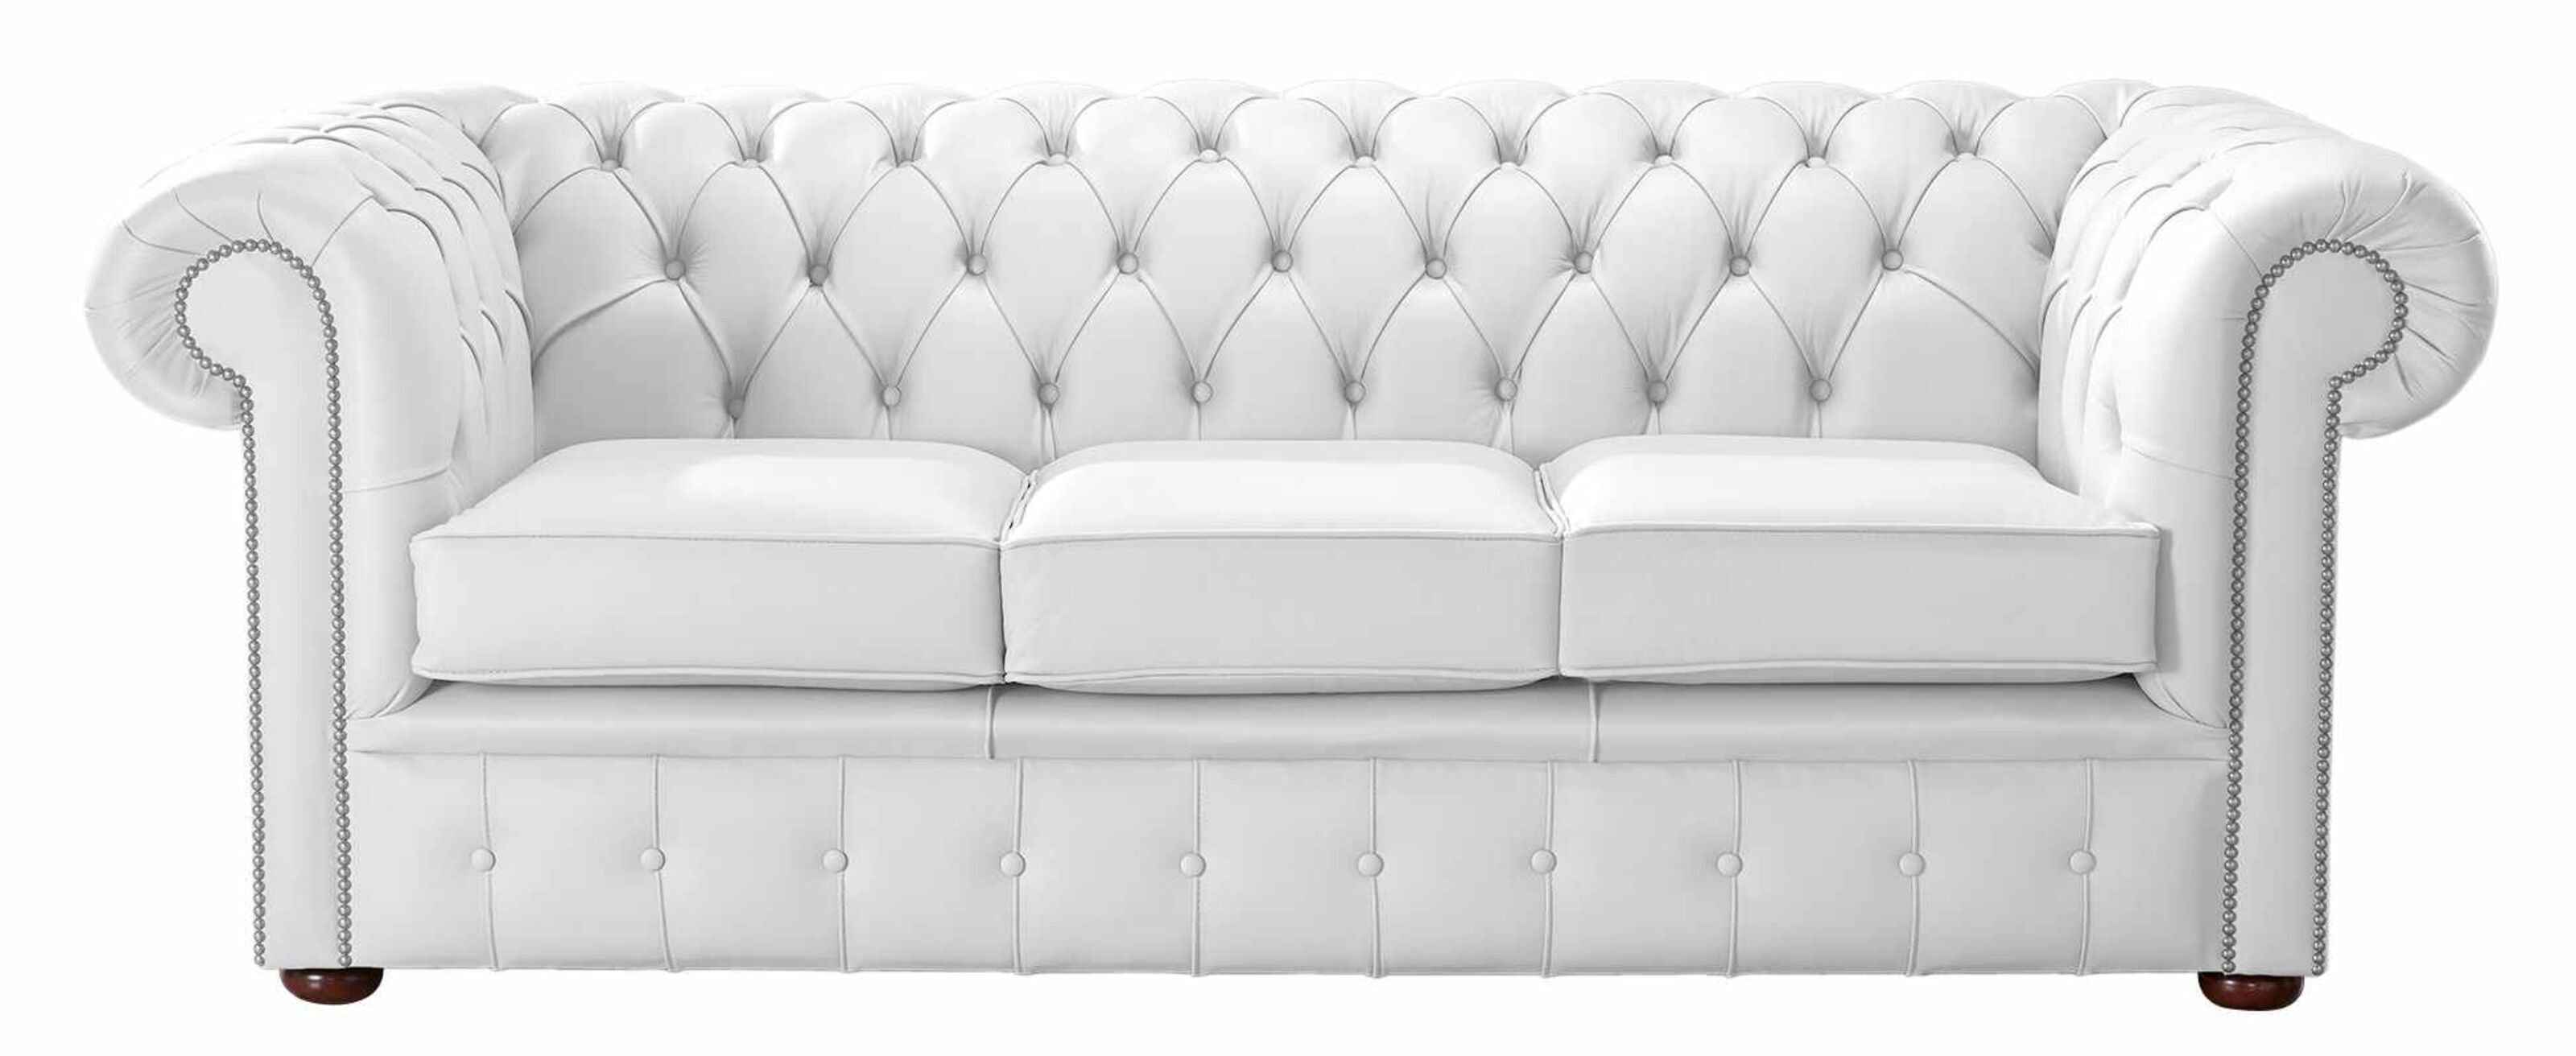 Exploring Chesterfield Sofa Options Finding the Ideal Match  %Post Title